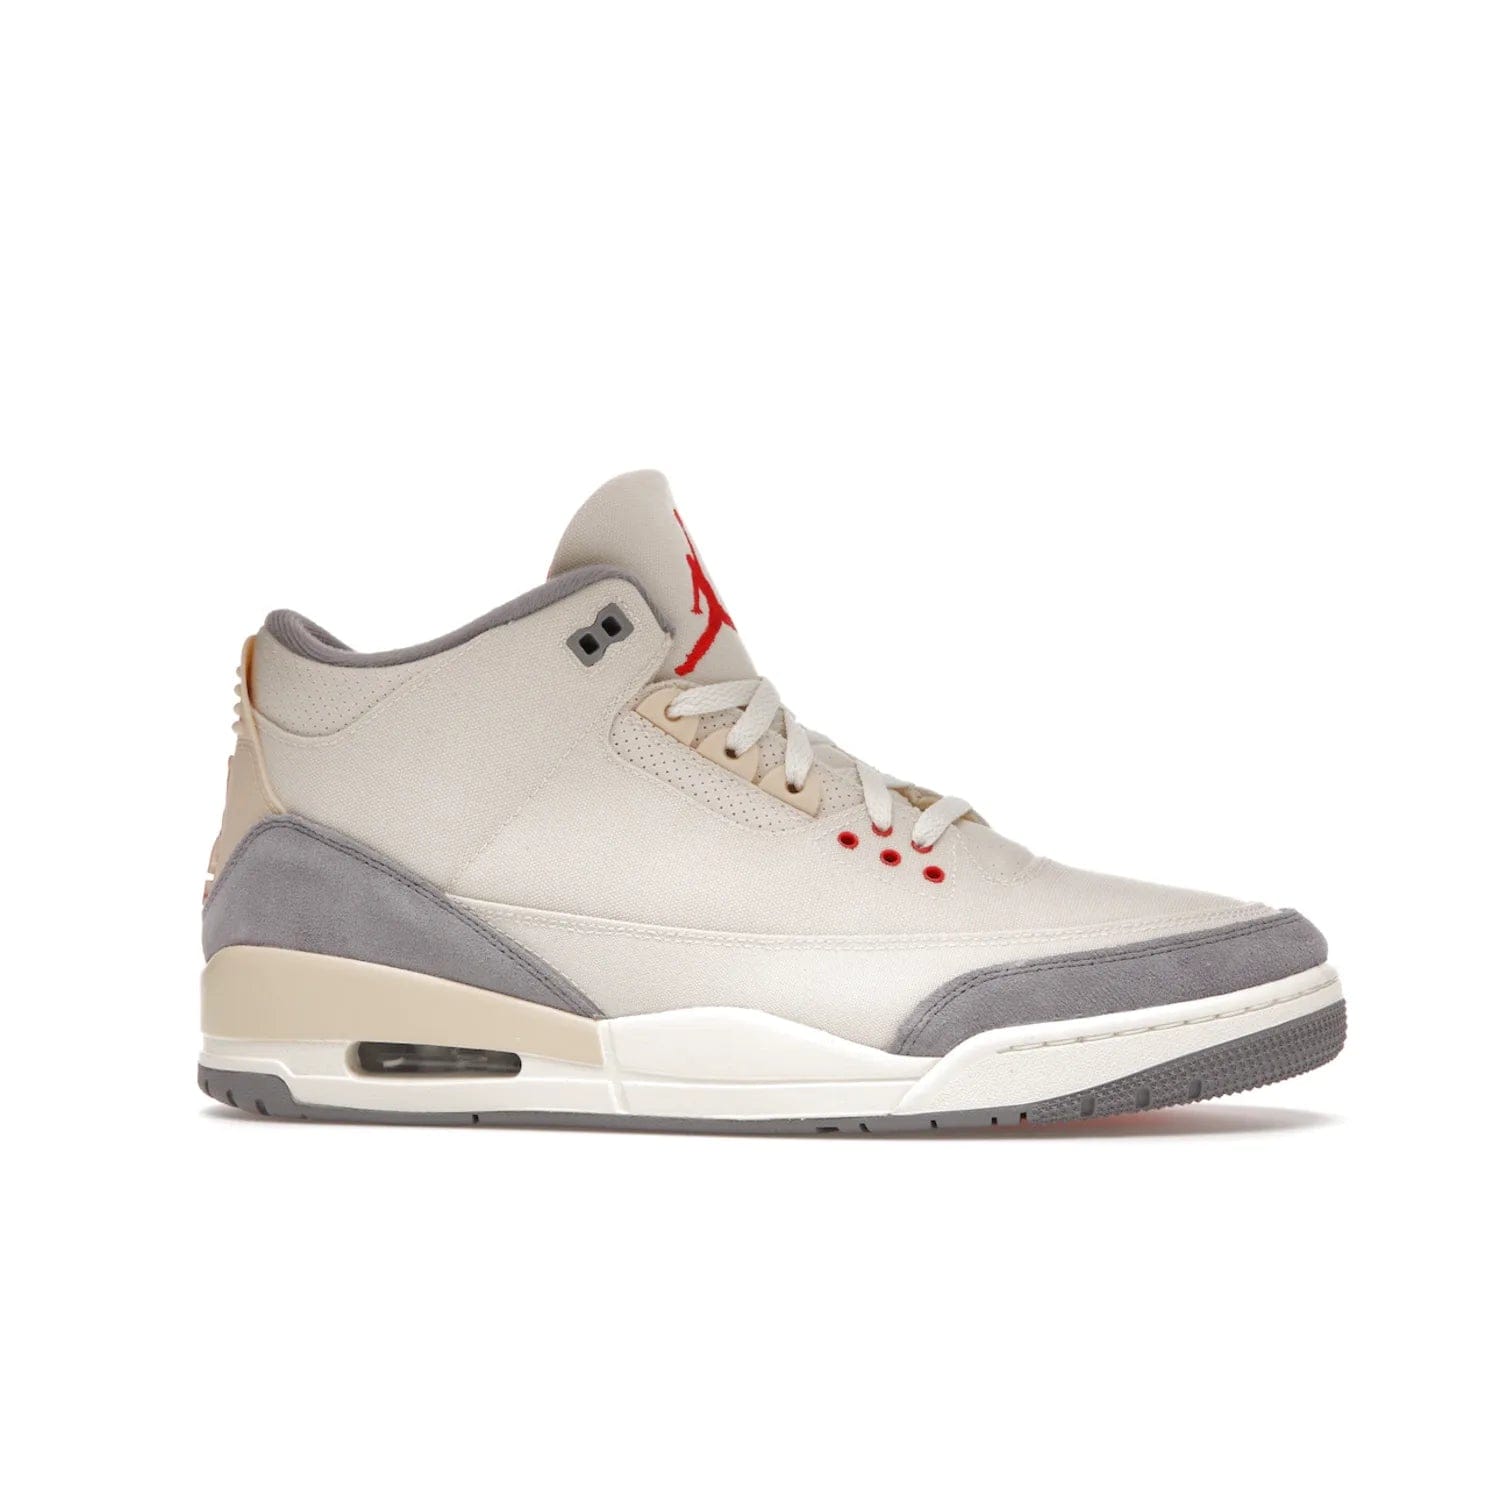 Jordan 3 Retro Muslin - Image 2 - Only at www.BallersClubKickz.com - Eye-catching Air Jordan 3 Retro Muslin in a neutral palette of grey, cream, and red. Featuring canvas upper, suede overlays and white/grey Air Max sole. Available in March 2022.